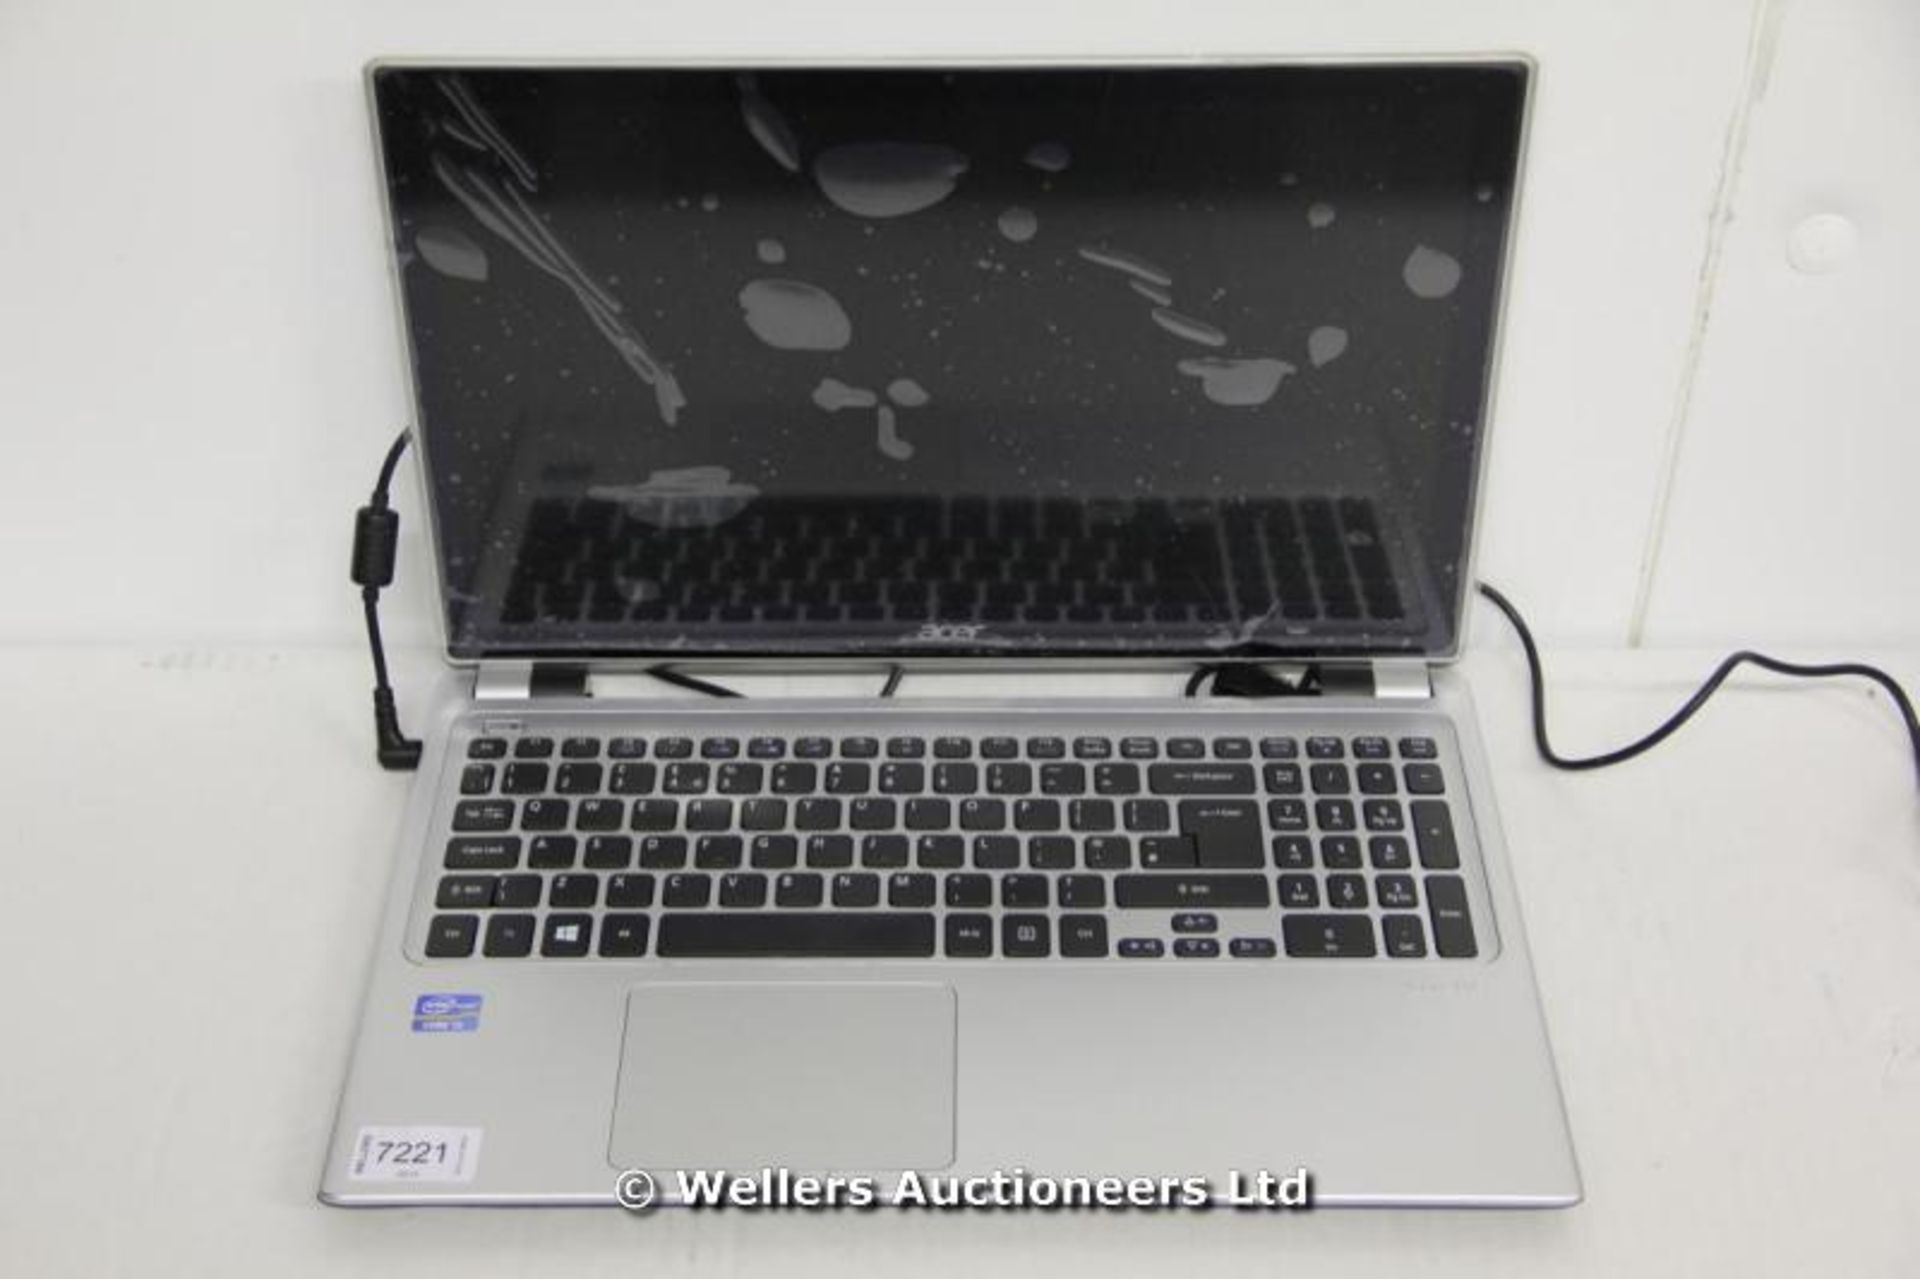 *"ACER ASPIRE V5-571P 15.6" TOUCH SCREEN LAPTOP / INTEL CORE I5 PROCESSOR / RAM 8GB / WITHOUT